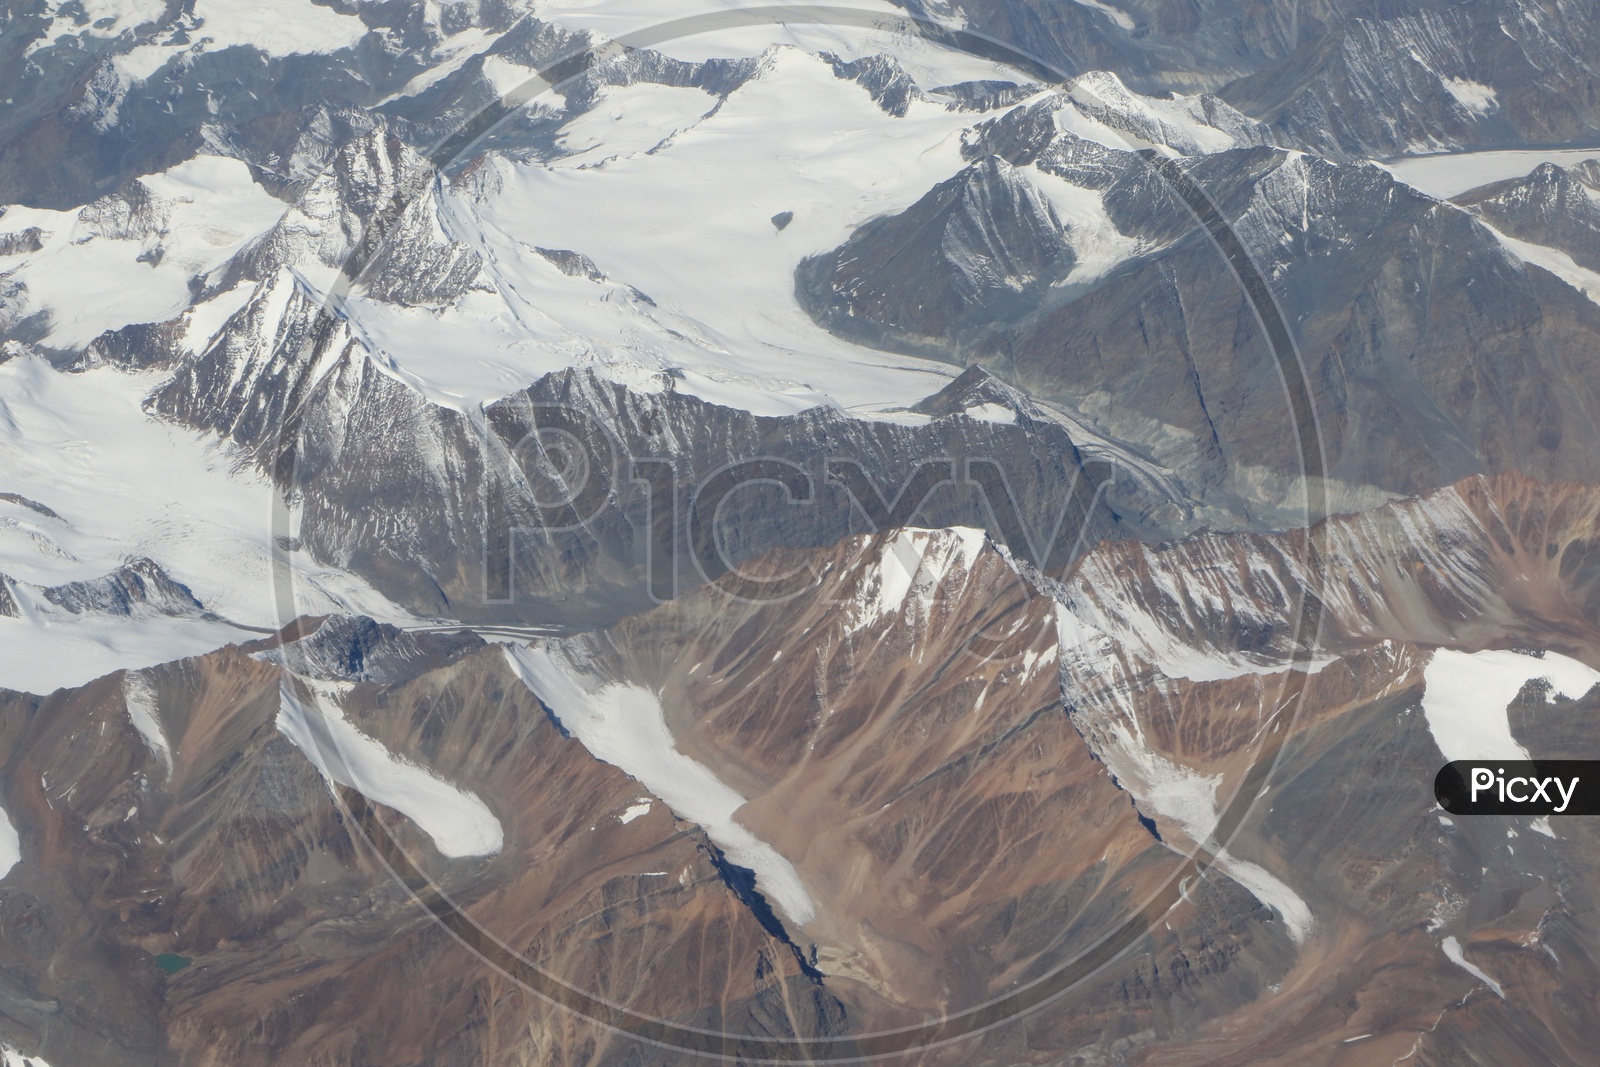 Beautiful Landscape of Snow Capped Mountains of Leh from flight window